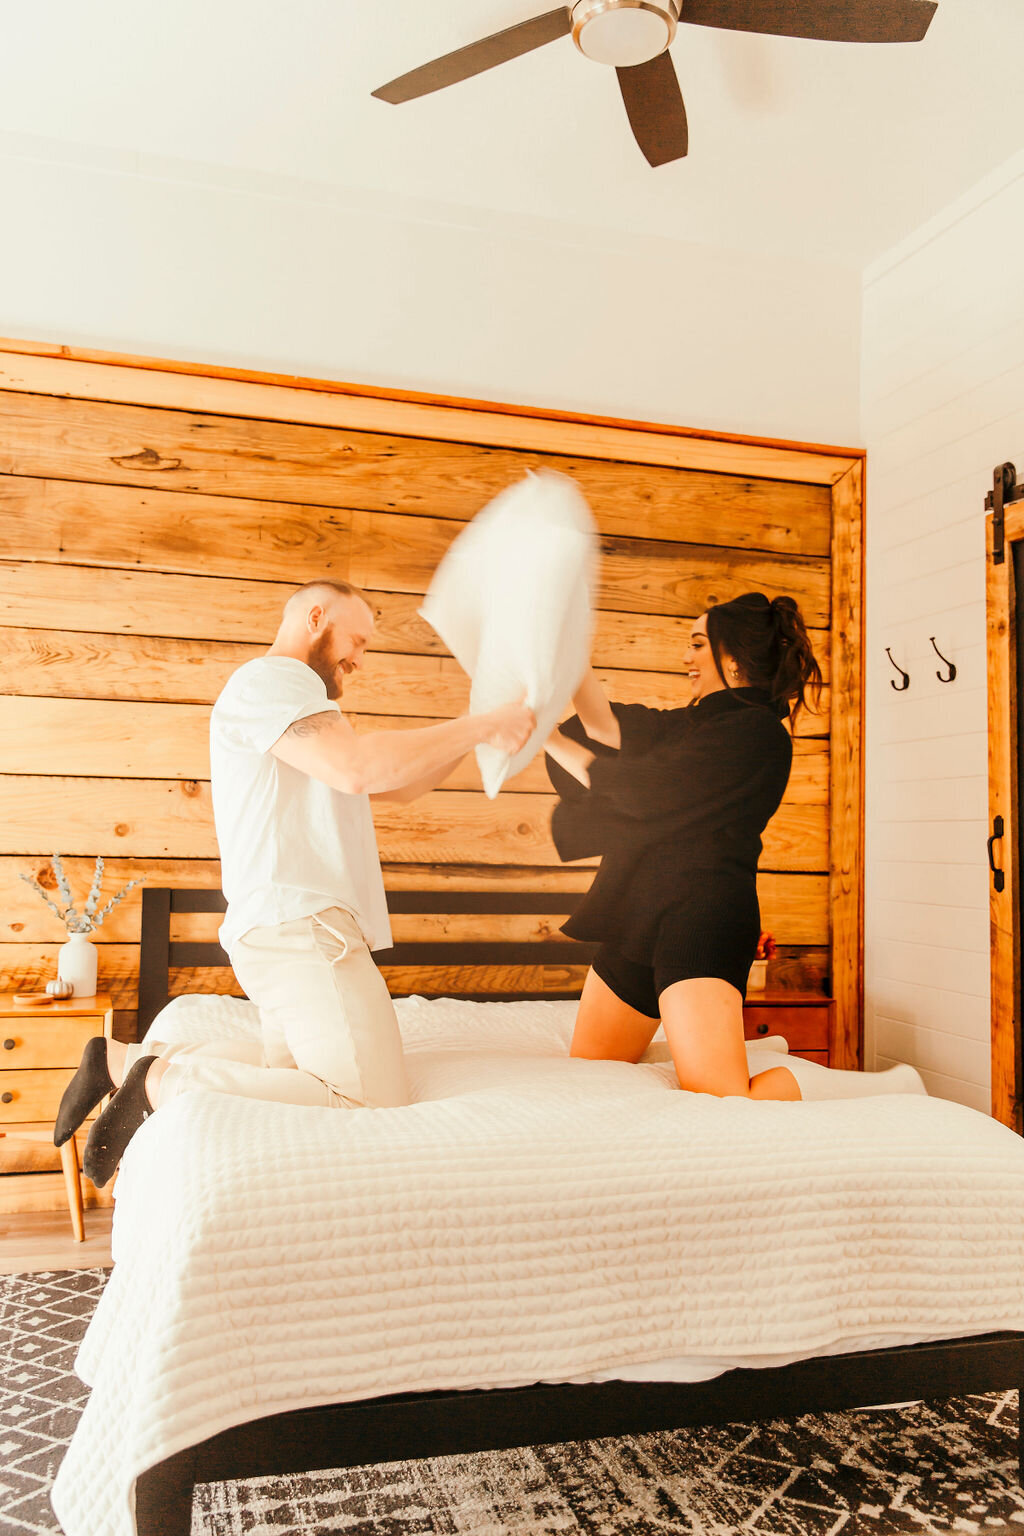 husband and wife pillow fighting in bed